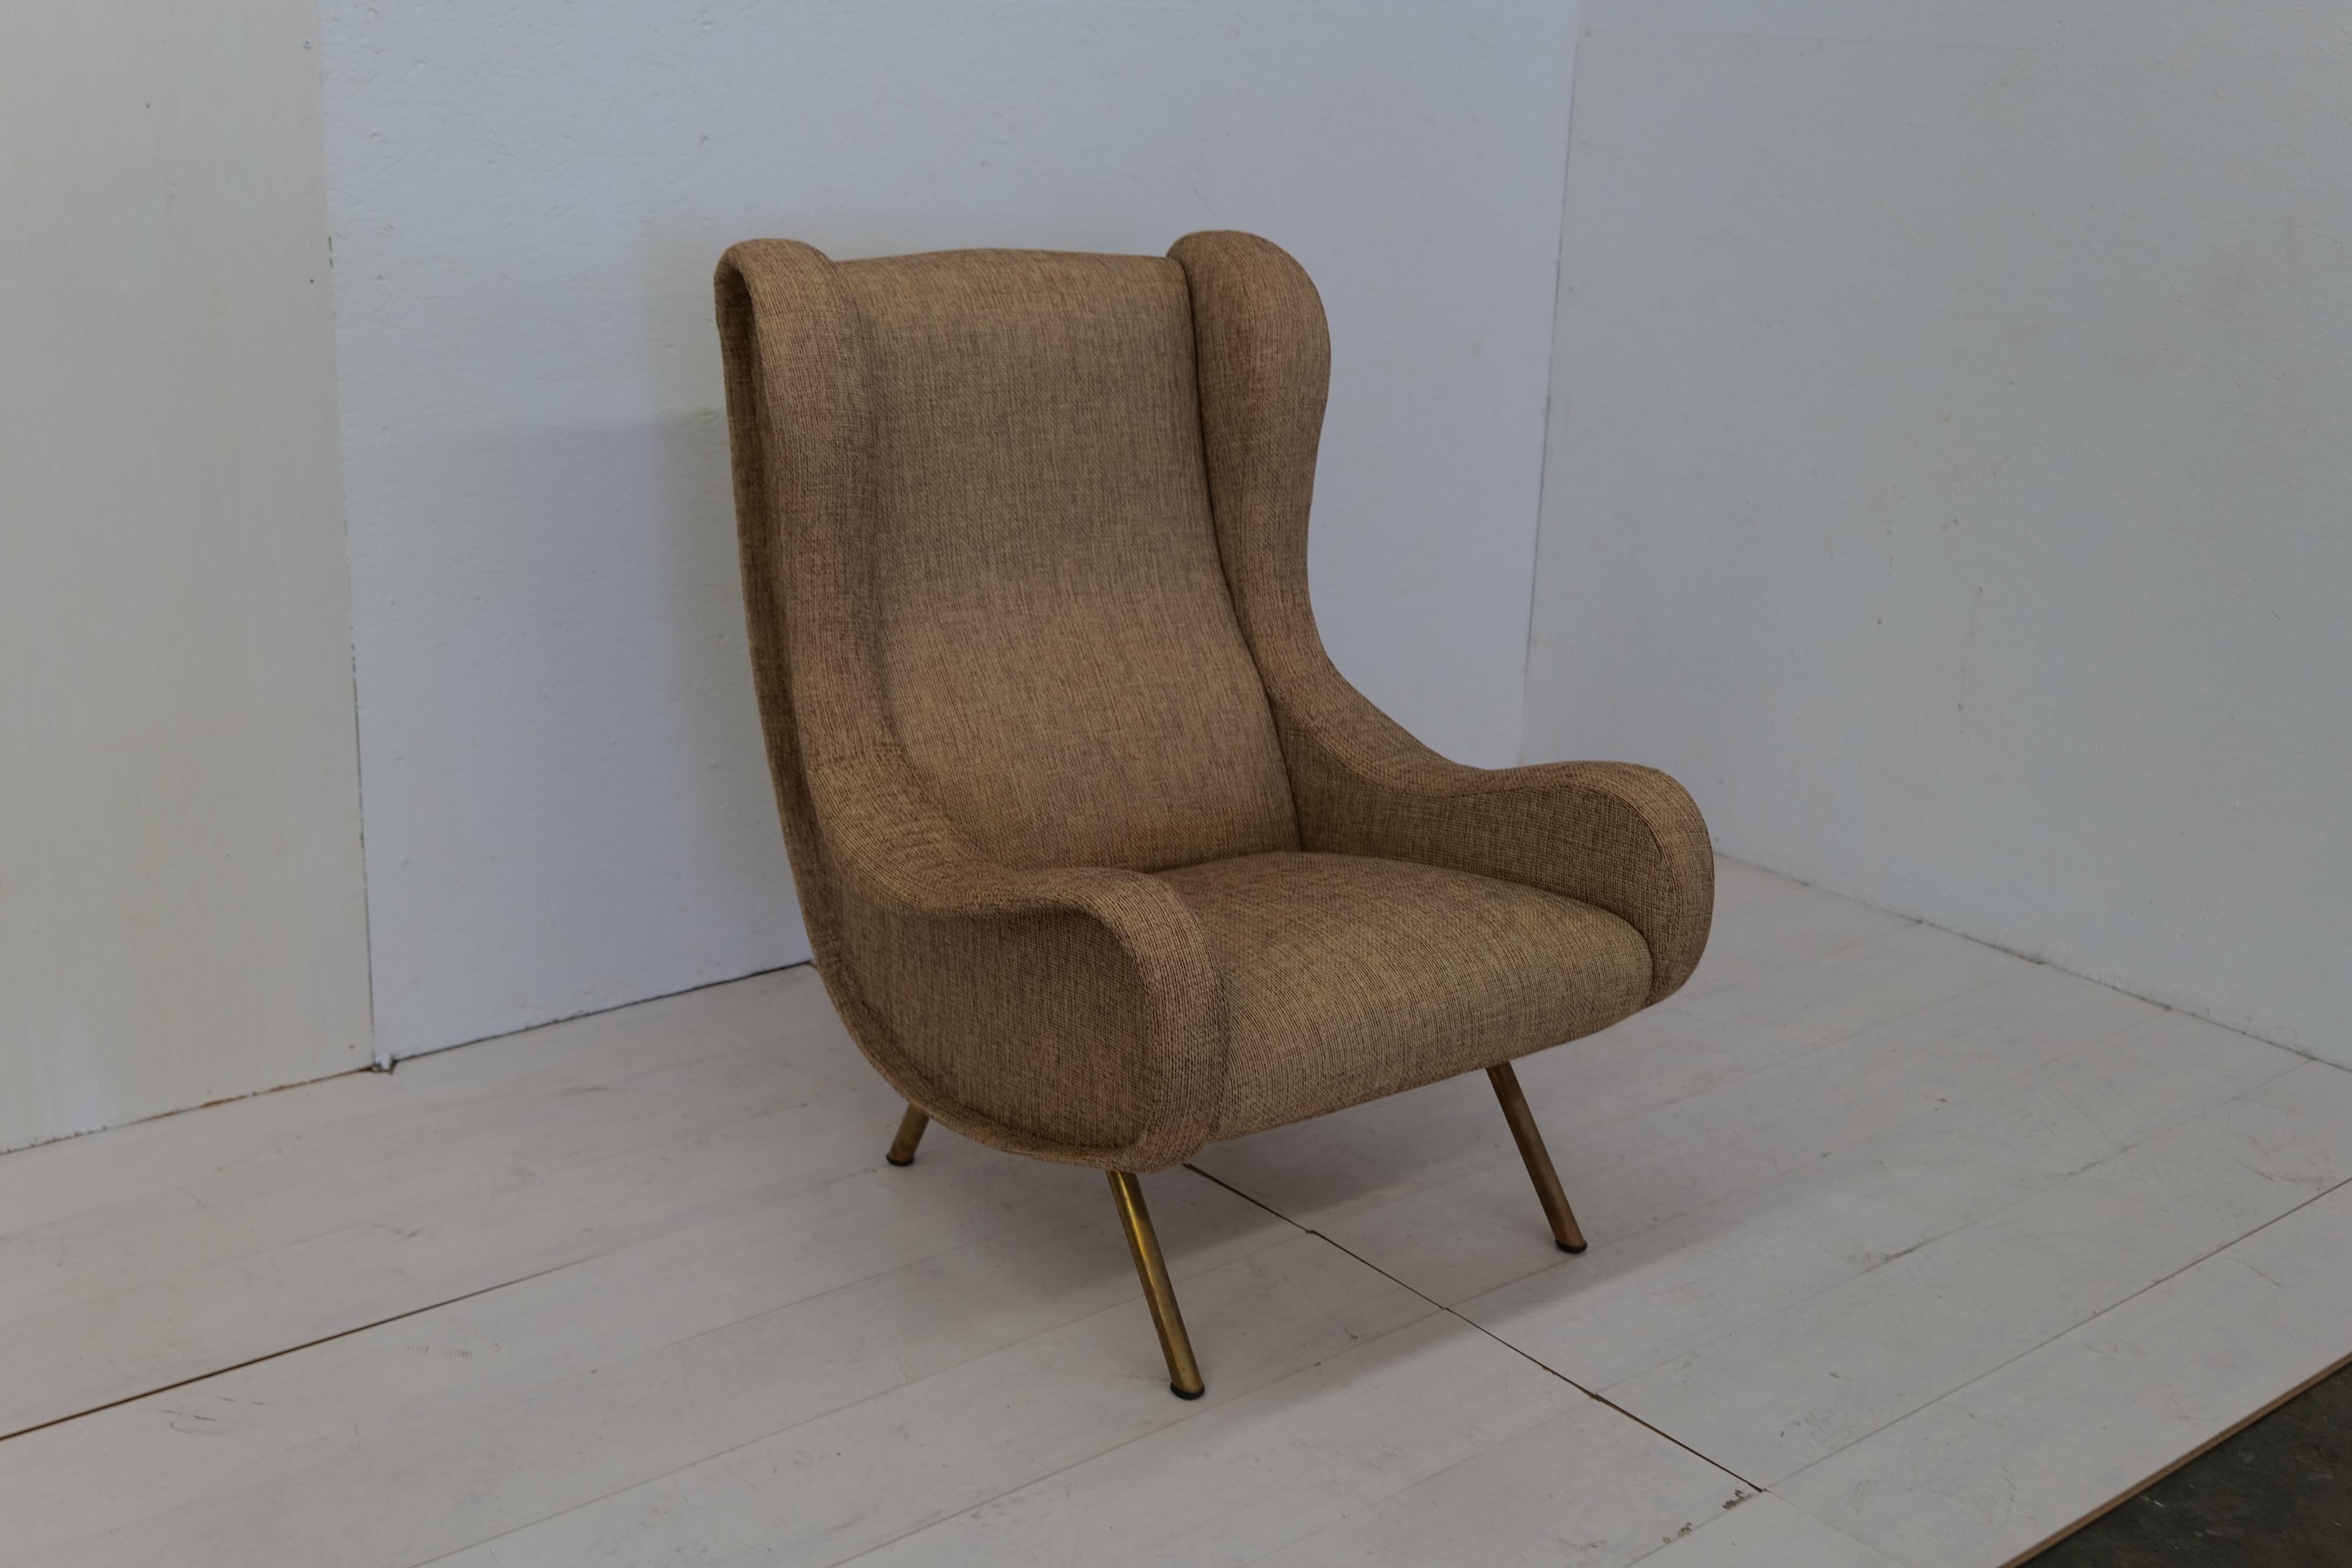 The Marco Zanuso Senior Armchair for Arflex, designed in the 1950s, is an iconic piece featuring brass legs that add a touch of luxury to its sleek and elegant design.

